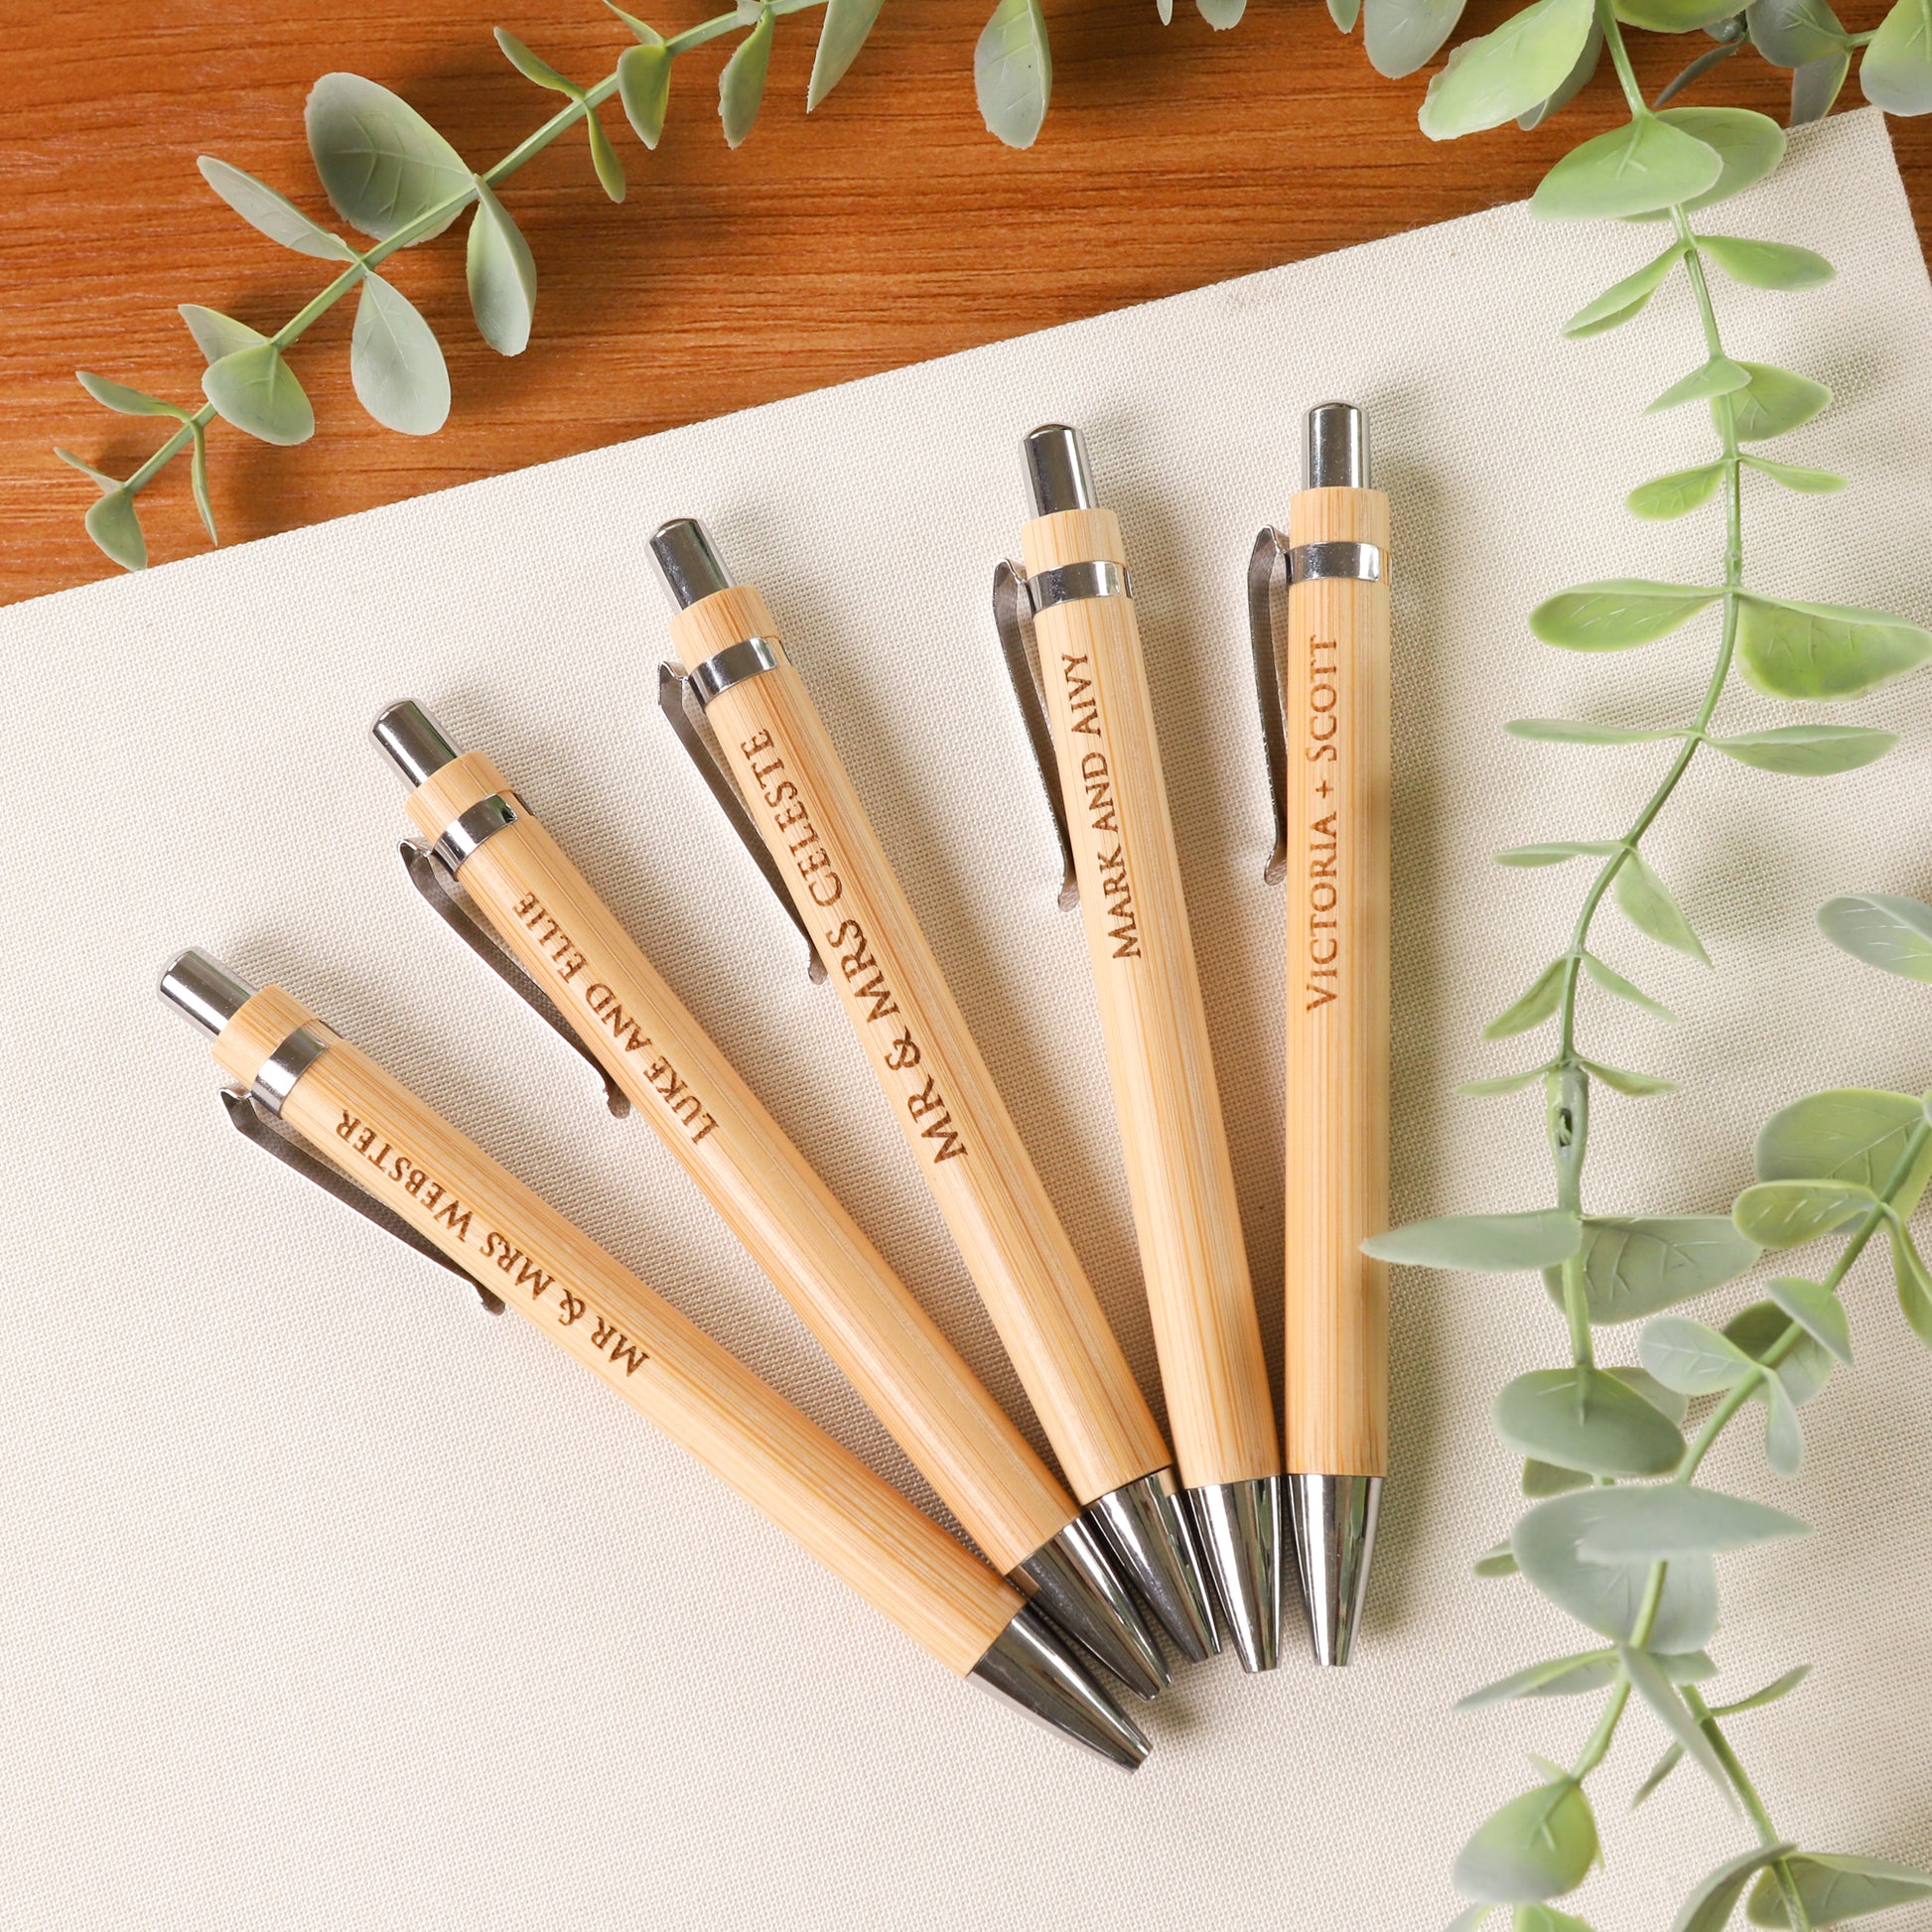 Personalised Wooden Ball Point Pen, Laser Engraved Bamboo Pen for wedding Gift with Names, Custom Pen